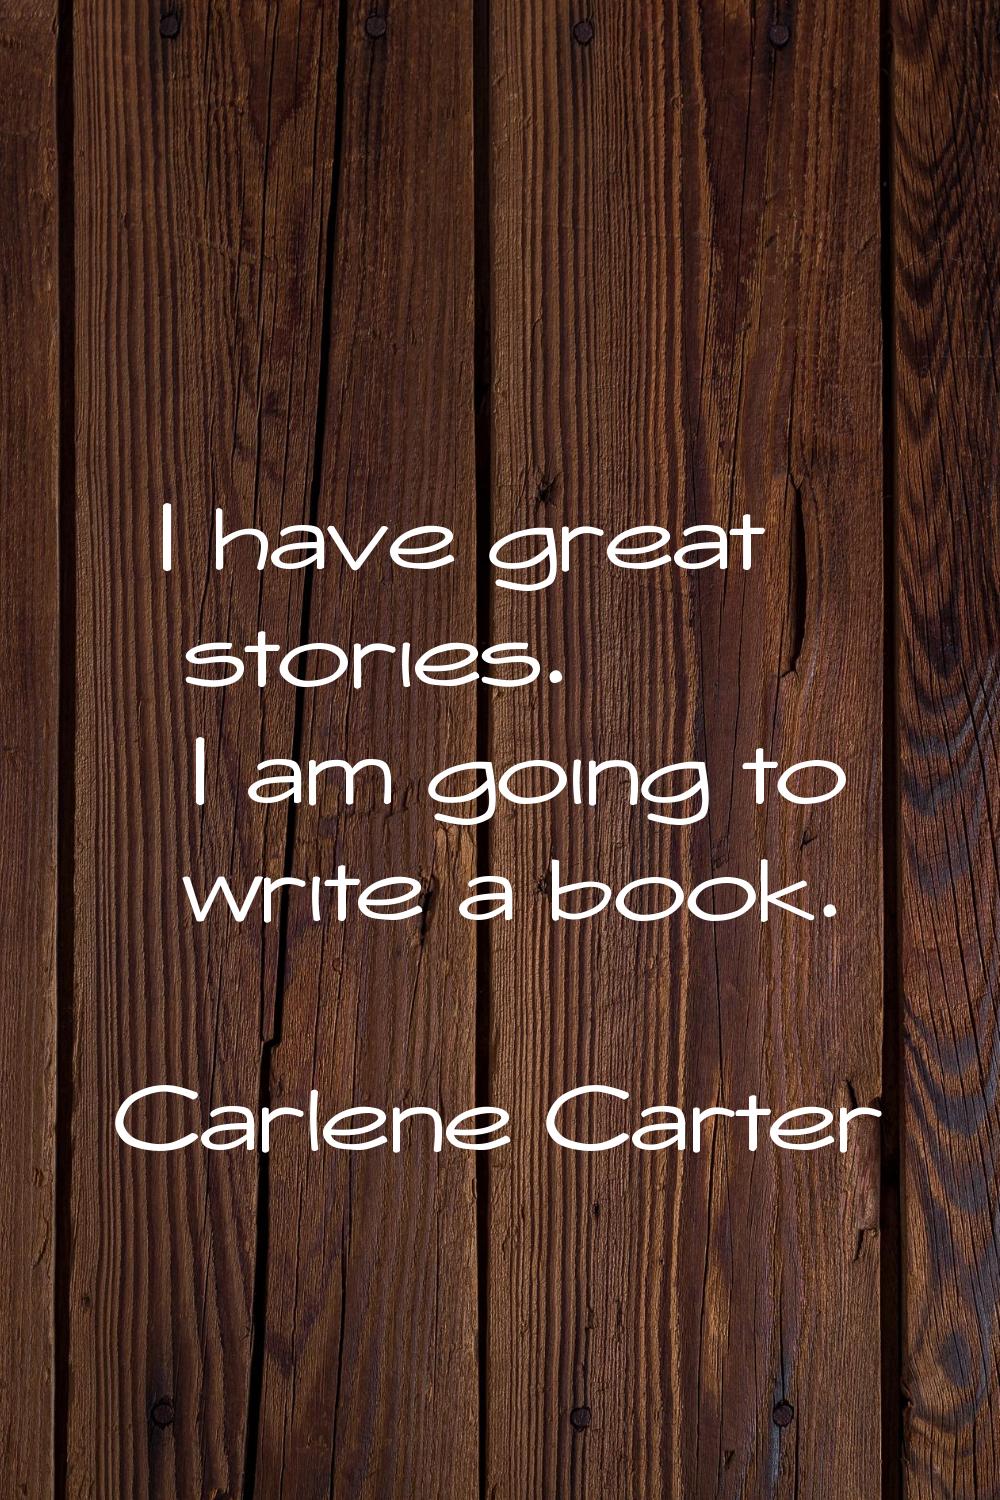 I have great stories. I am going to write a book.